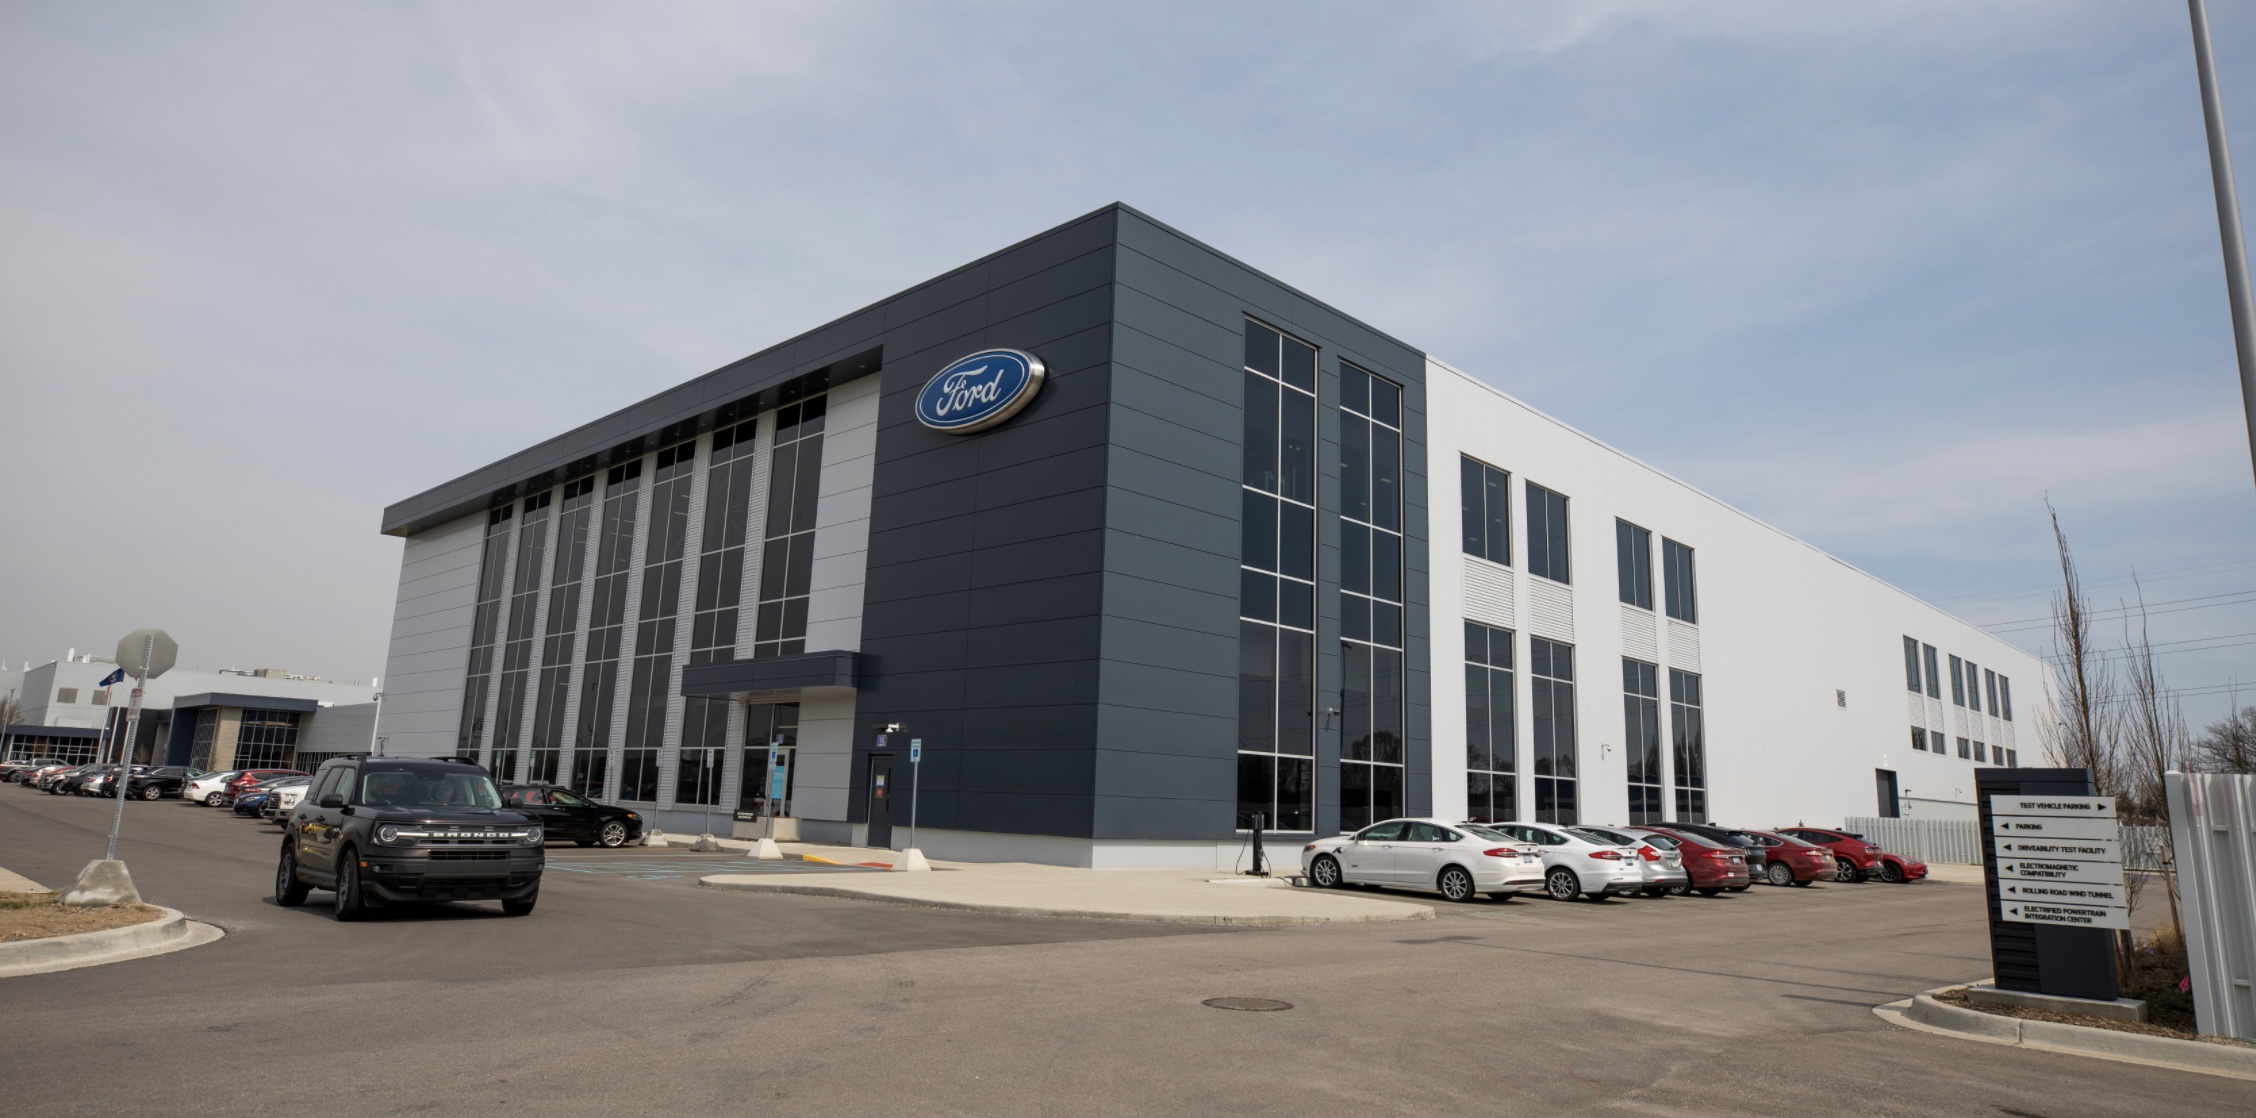 We Hear: Ford Kills Drive One Slogan, Replaces it With Go Further